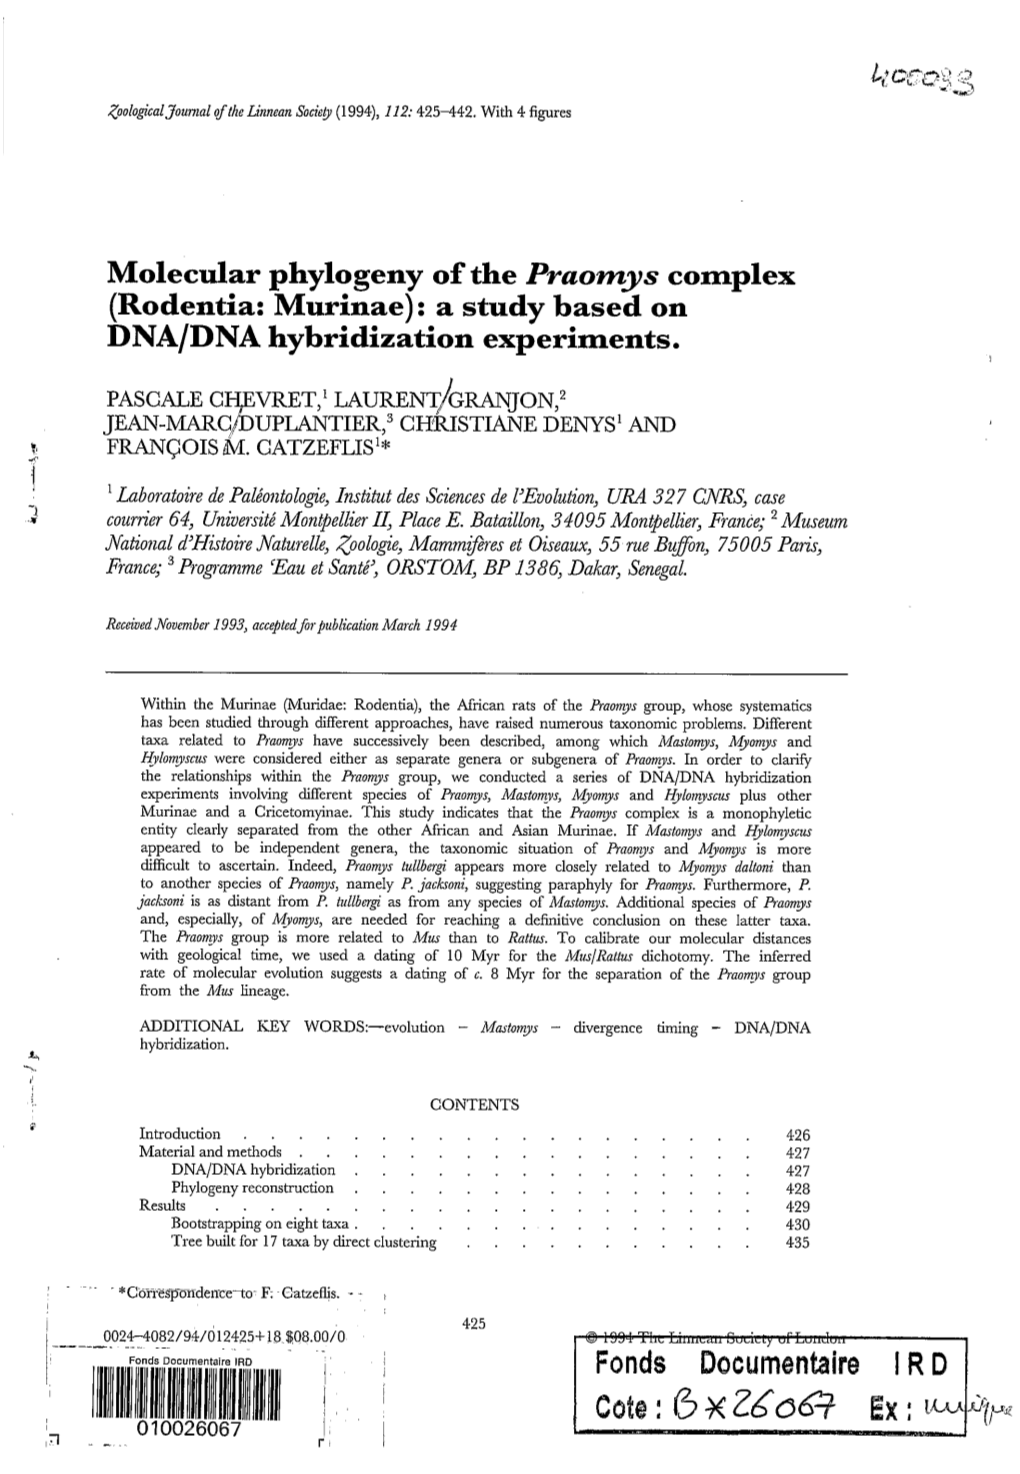 Molecular Phylogeny of the Praomys Complex (Rodentia: Murinae): a Study Based on DNA/DNA Hybridization Experiments